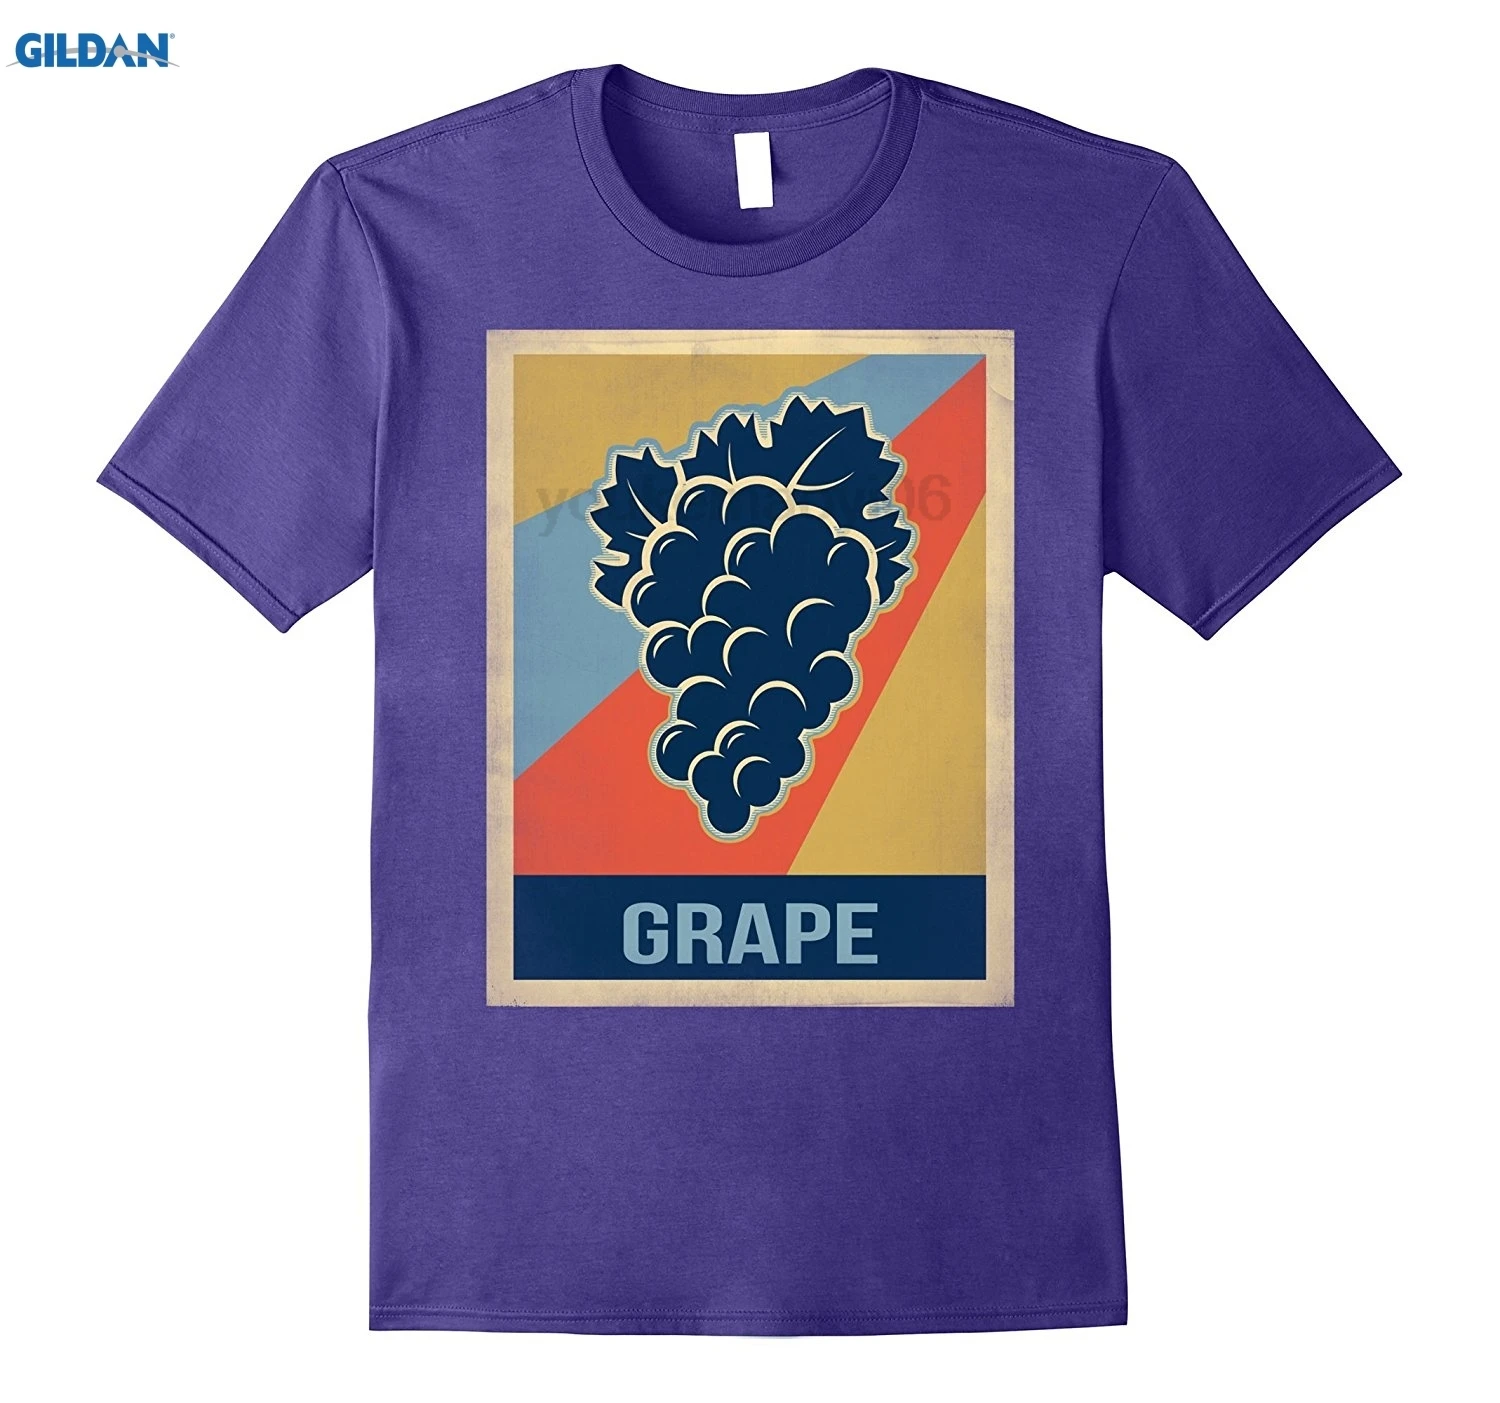 GILDAN Vintage style grape tshirt-in T-Shirts from Men's Clothing on ...